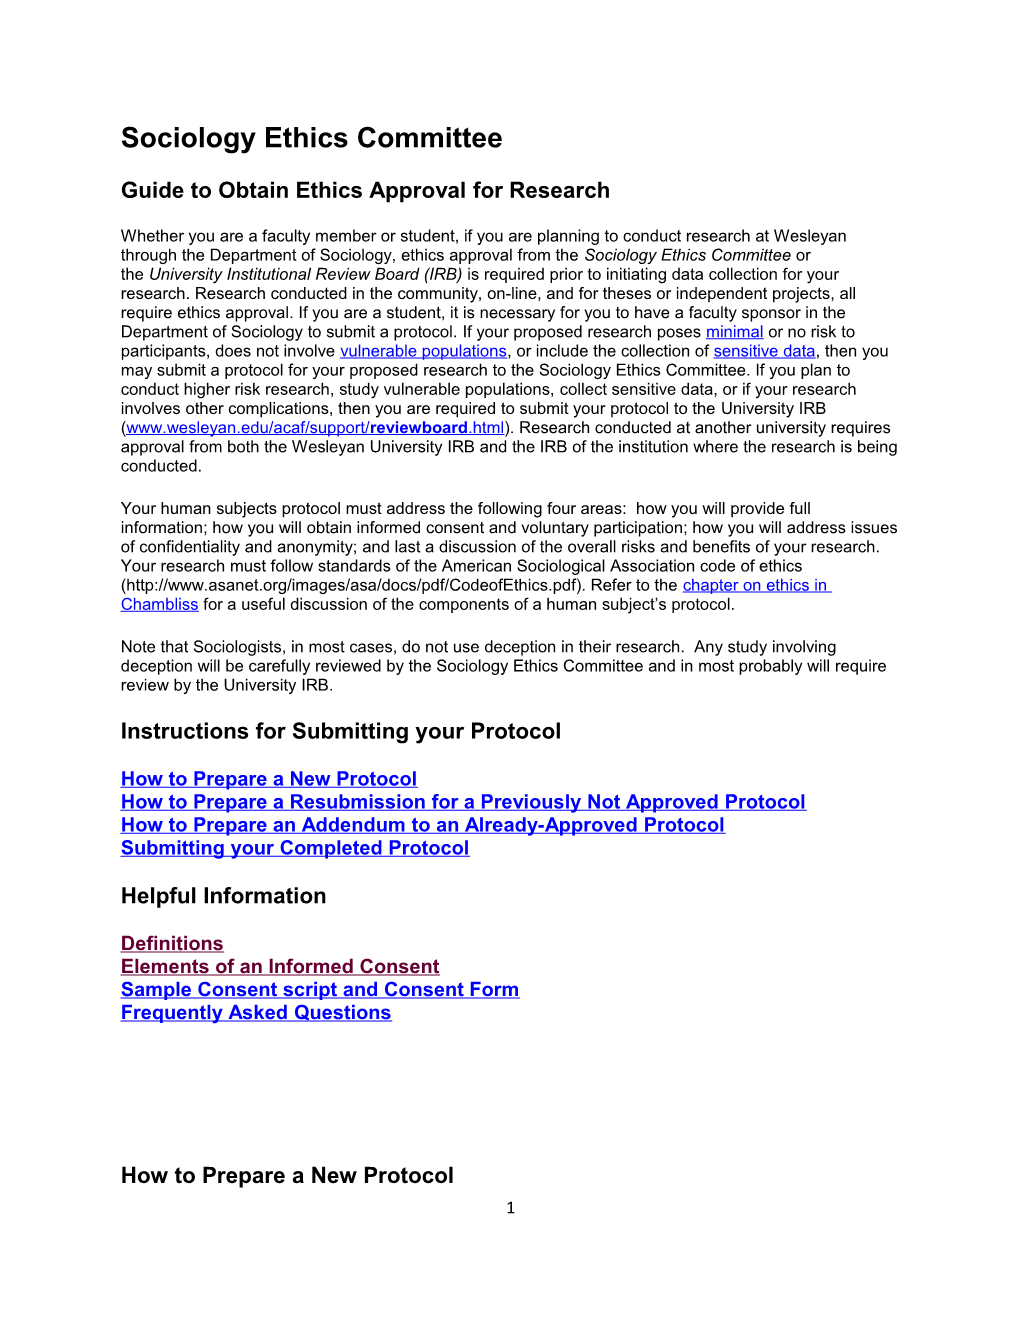 Guide to Obtain Ethics Approval for Research